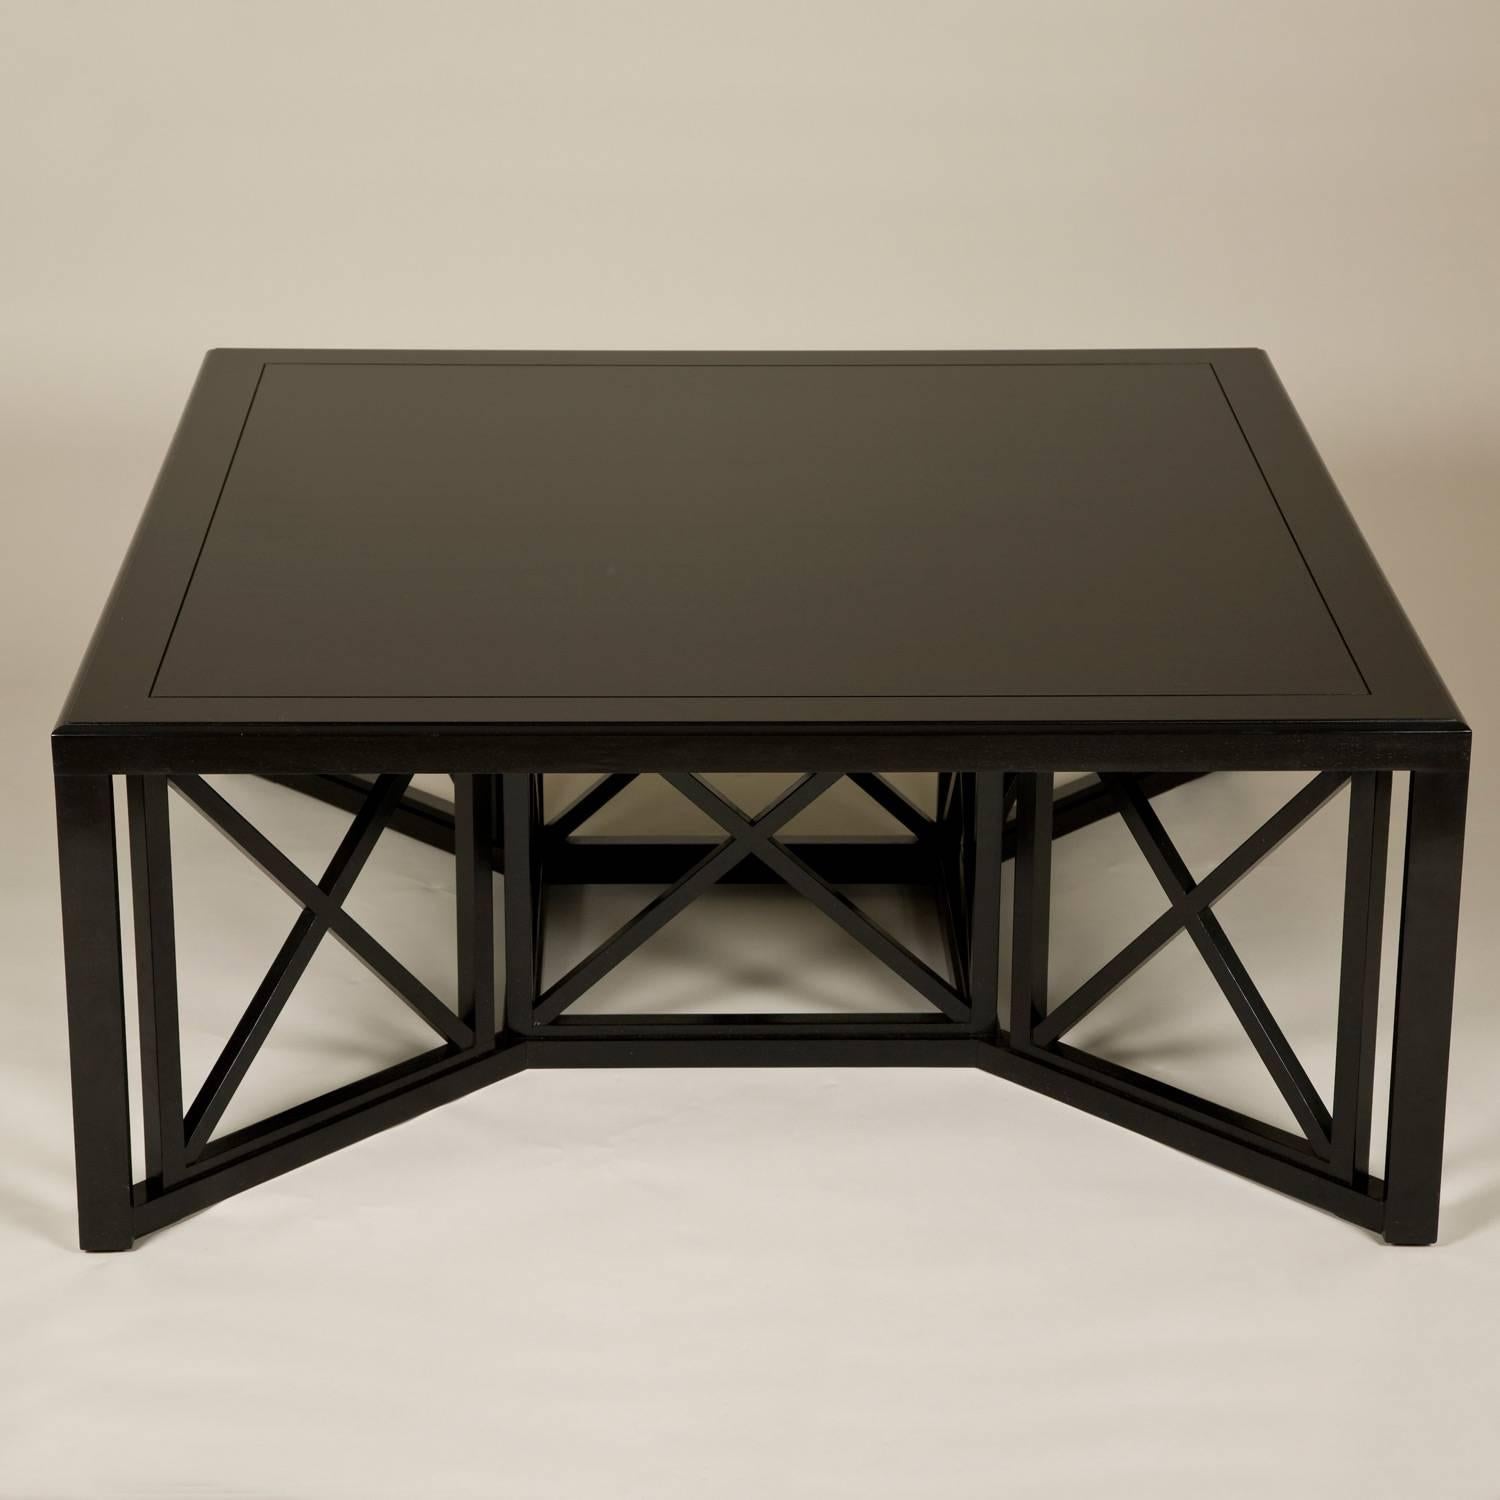 Square Cockpen coffee table. Lacquered or painted wood, made to order. Price for this size in an ebonized finish £2,980.00 plus VAT.